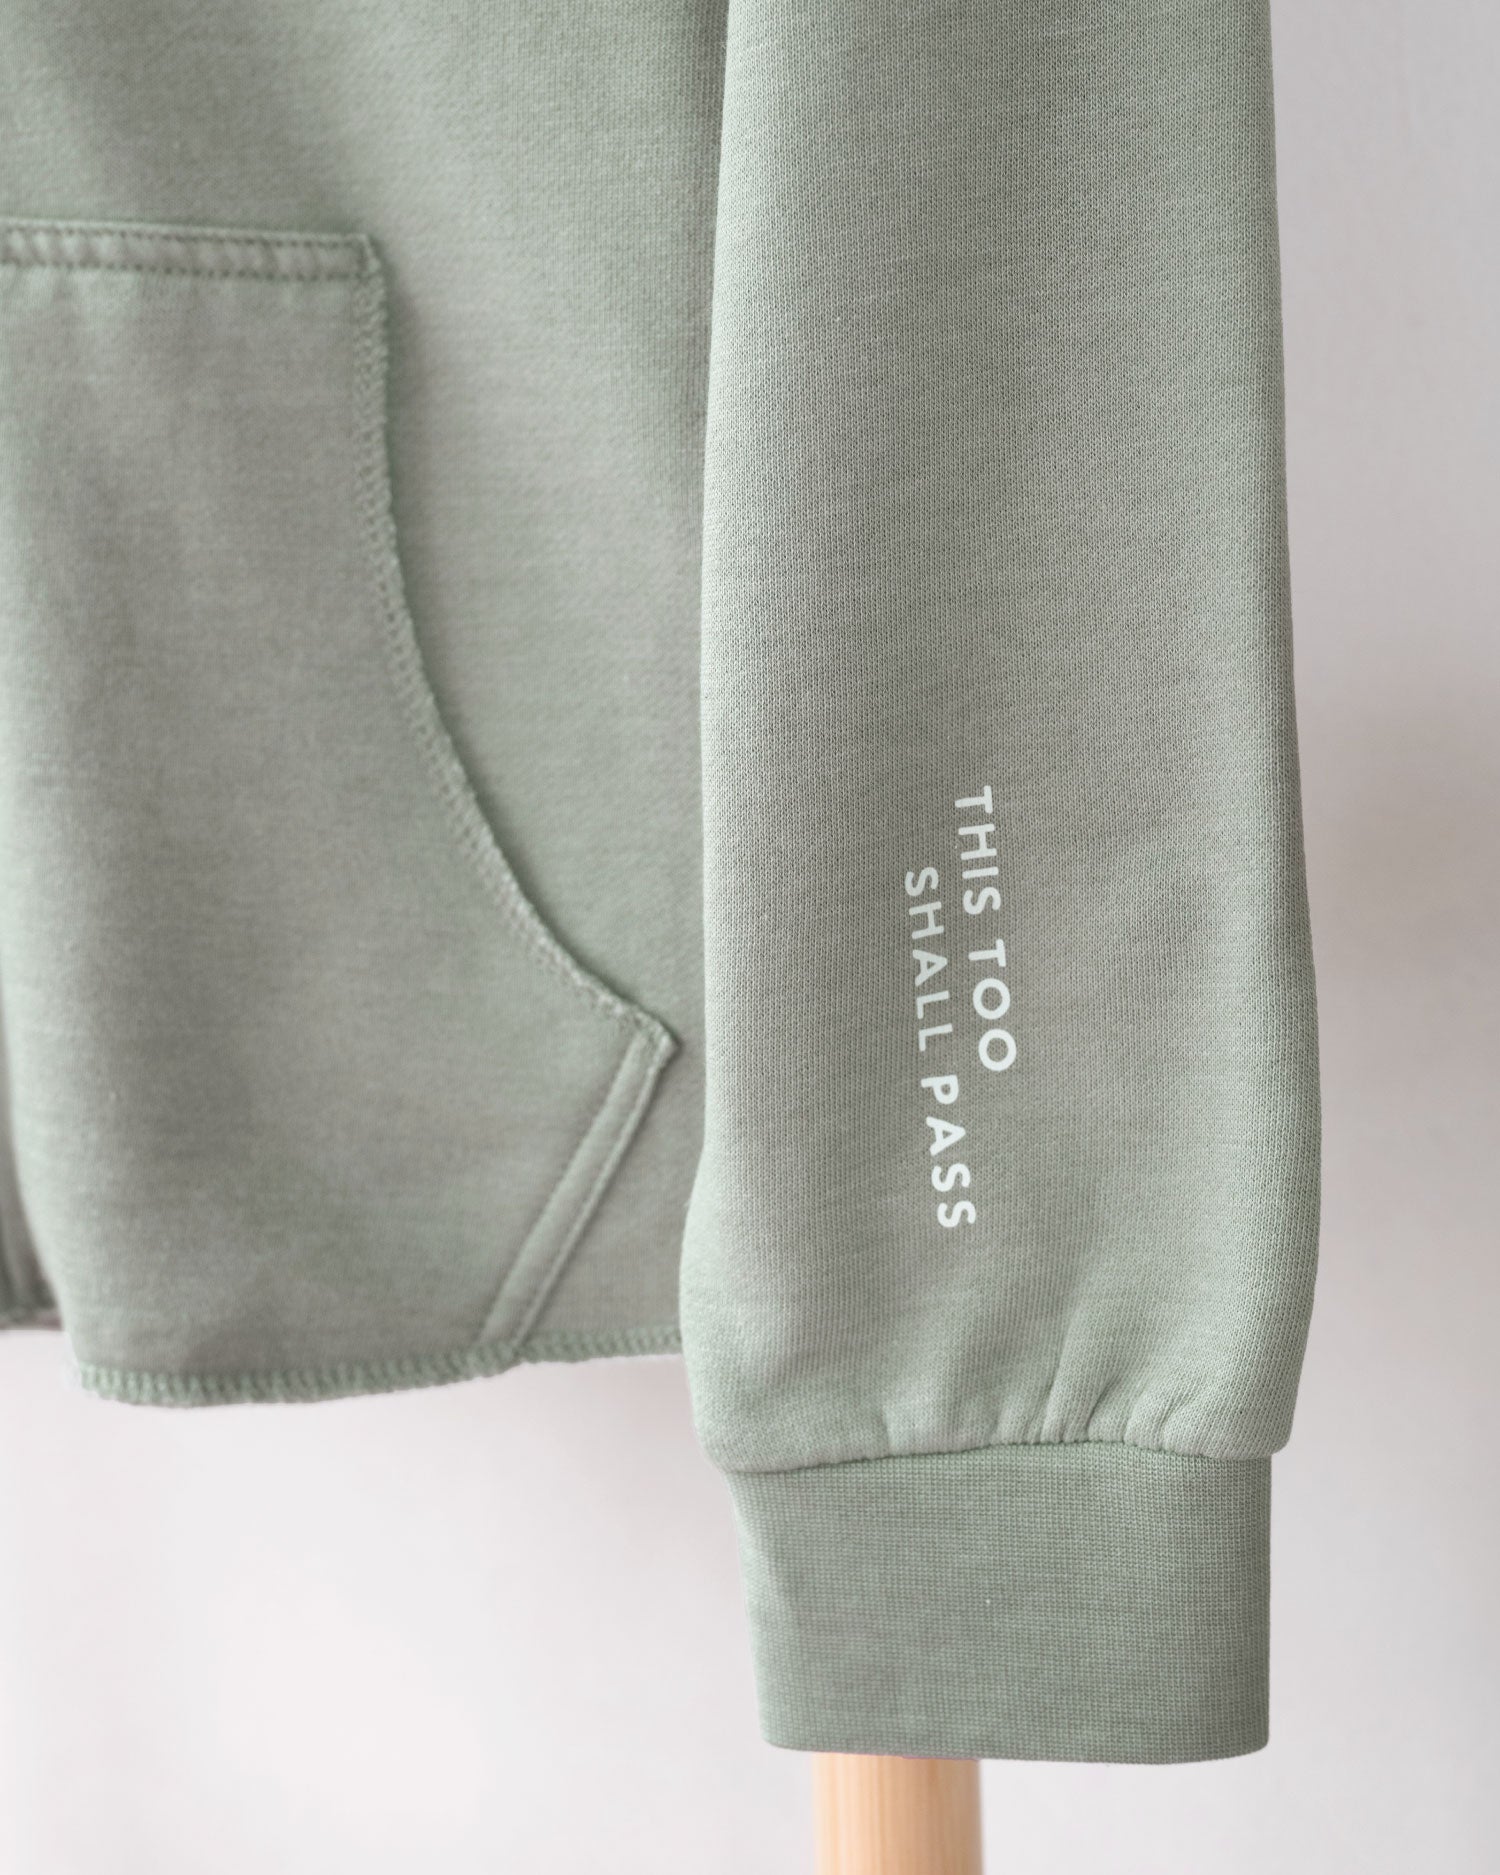 This Too Shall Pass | Women's Zip Hoodie with Sleeve Affirmation